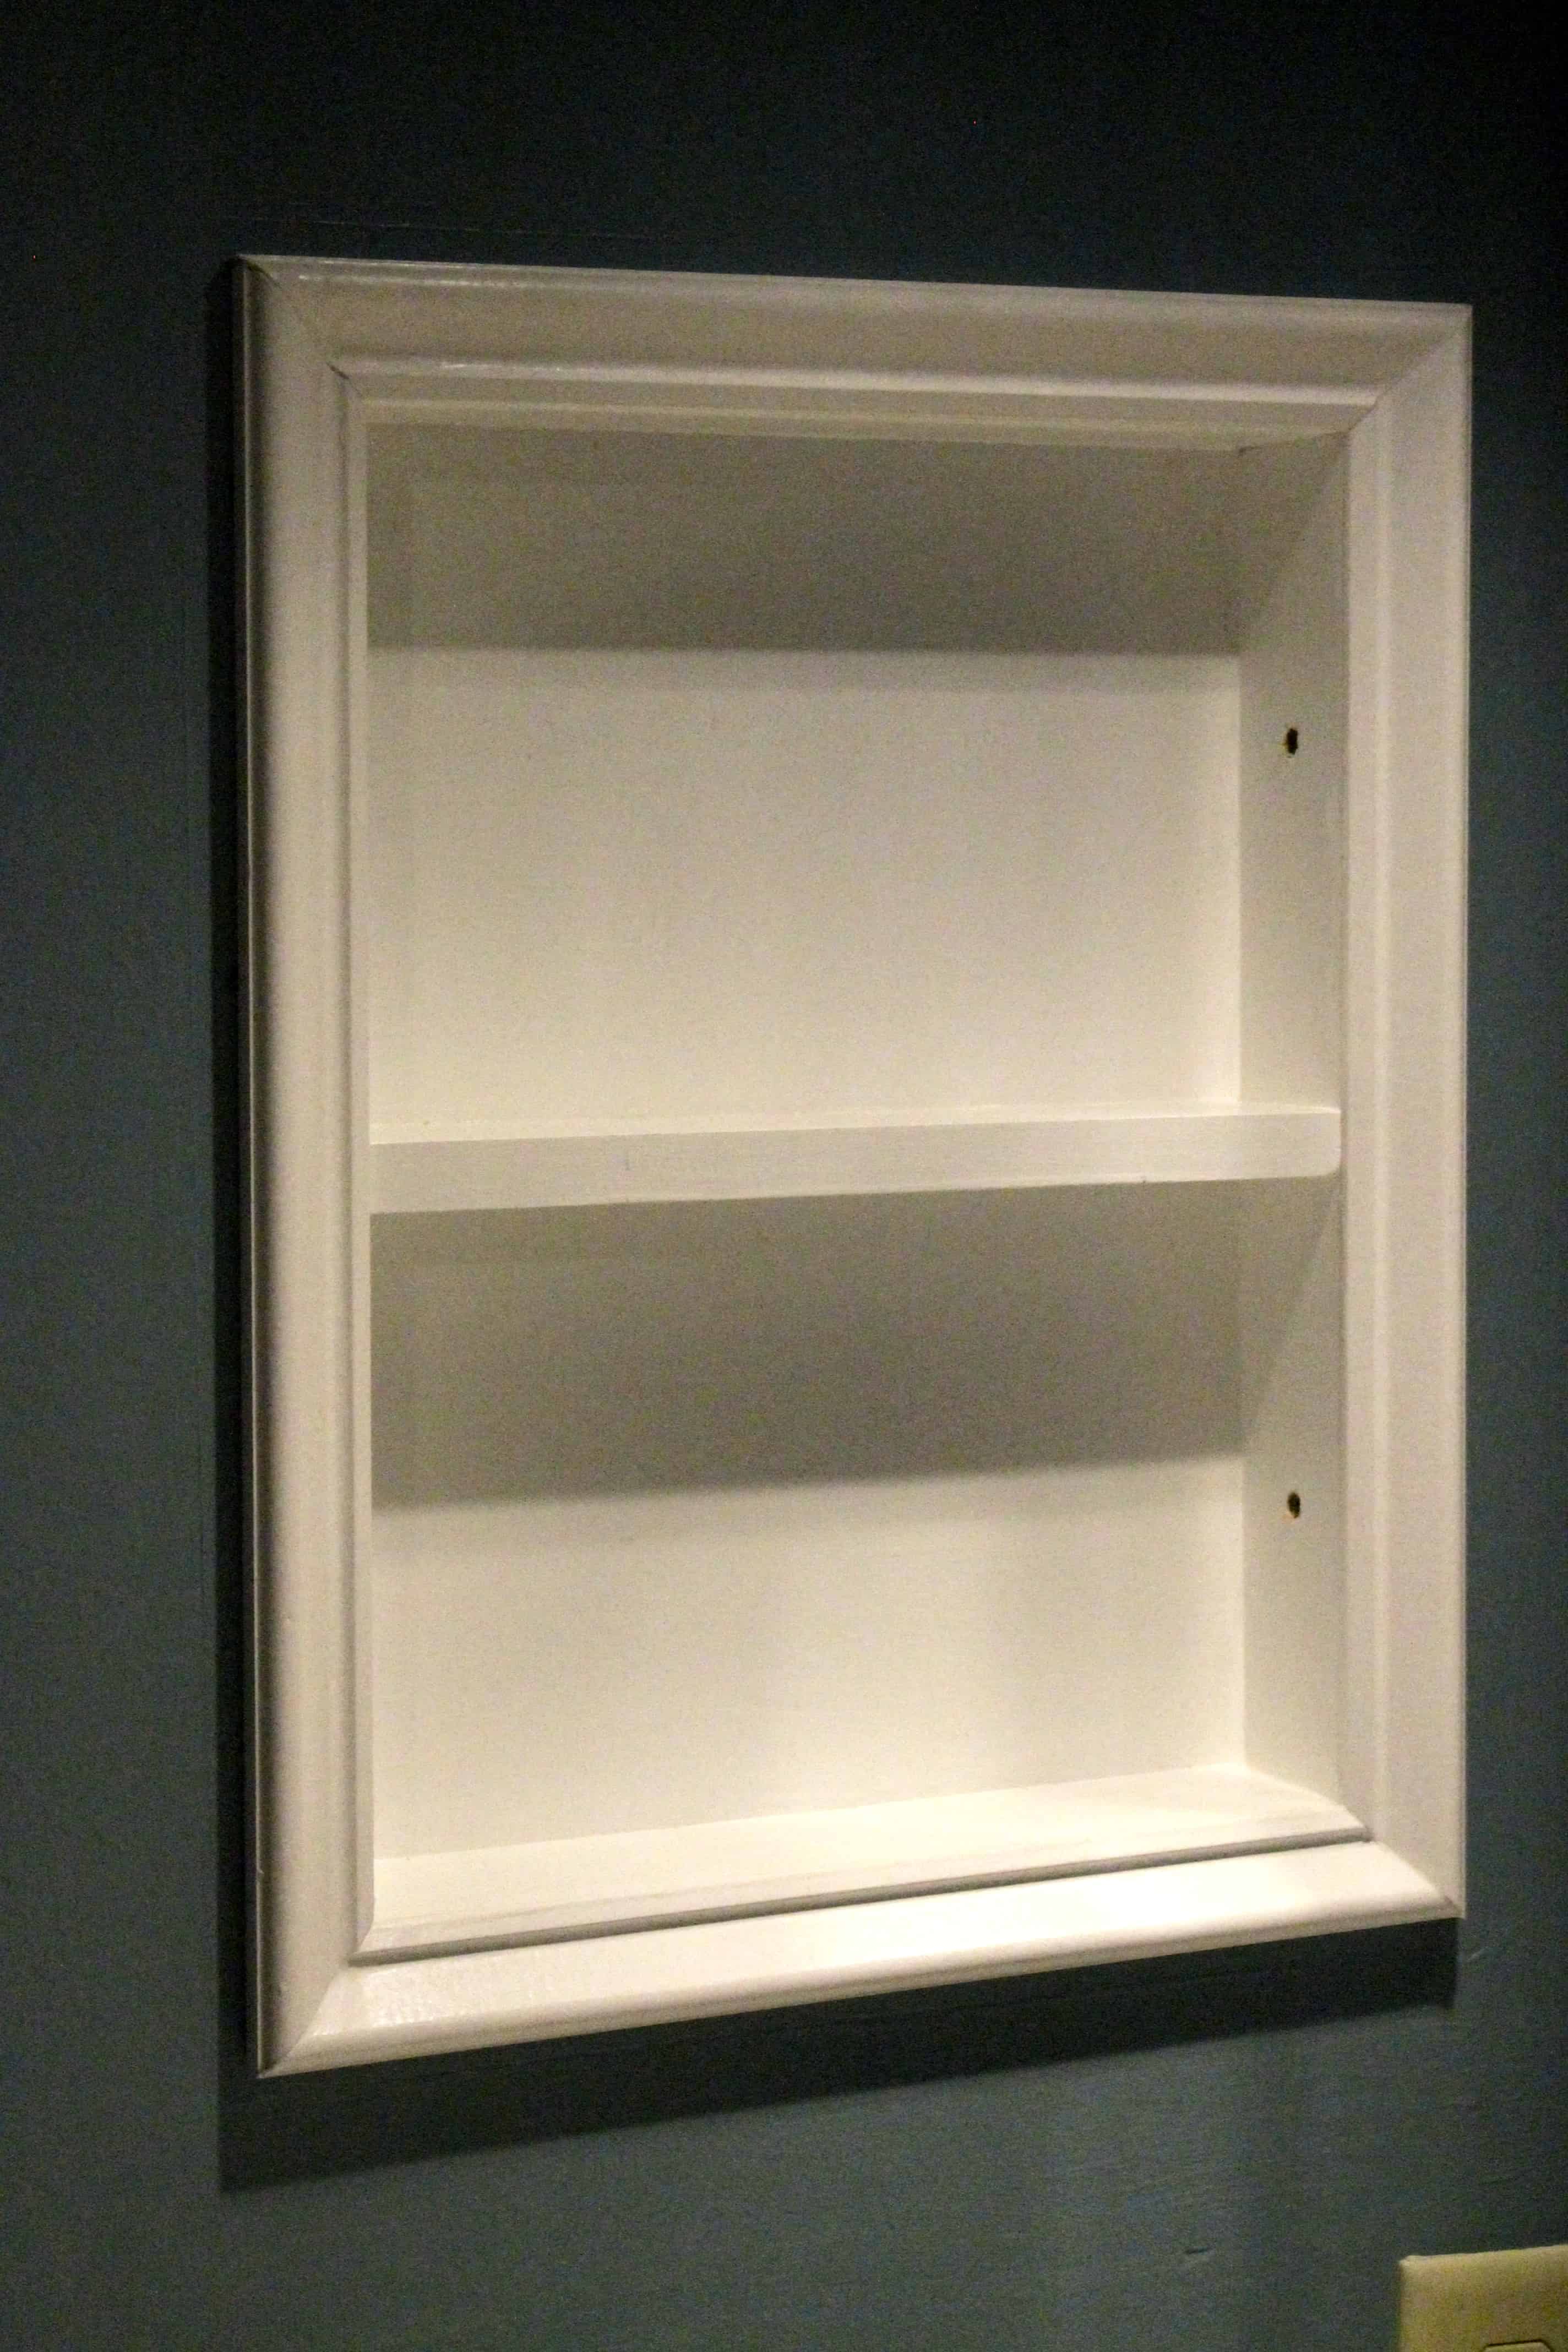 replace medicine cabinet with recessed shelves